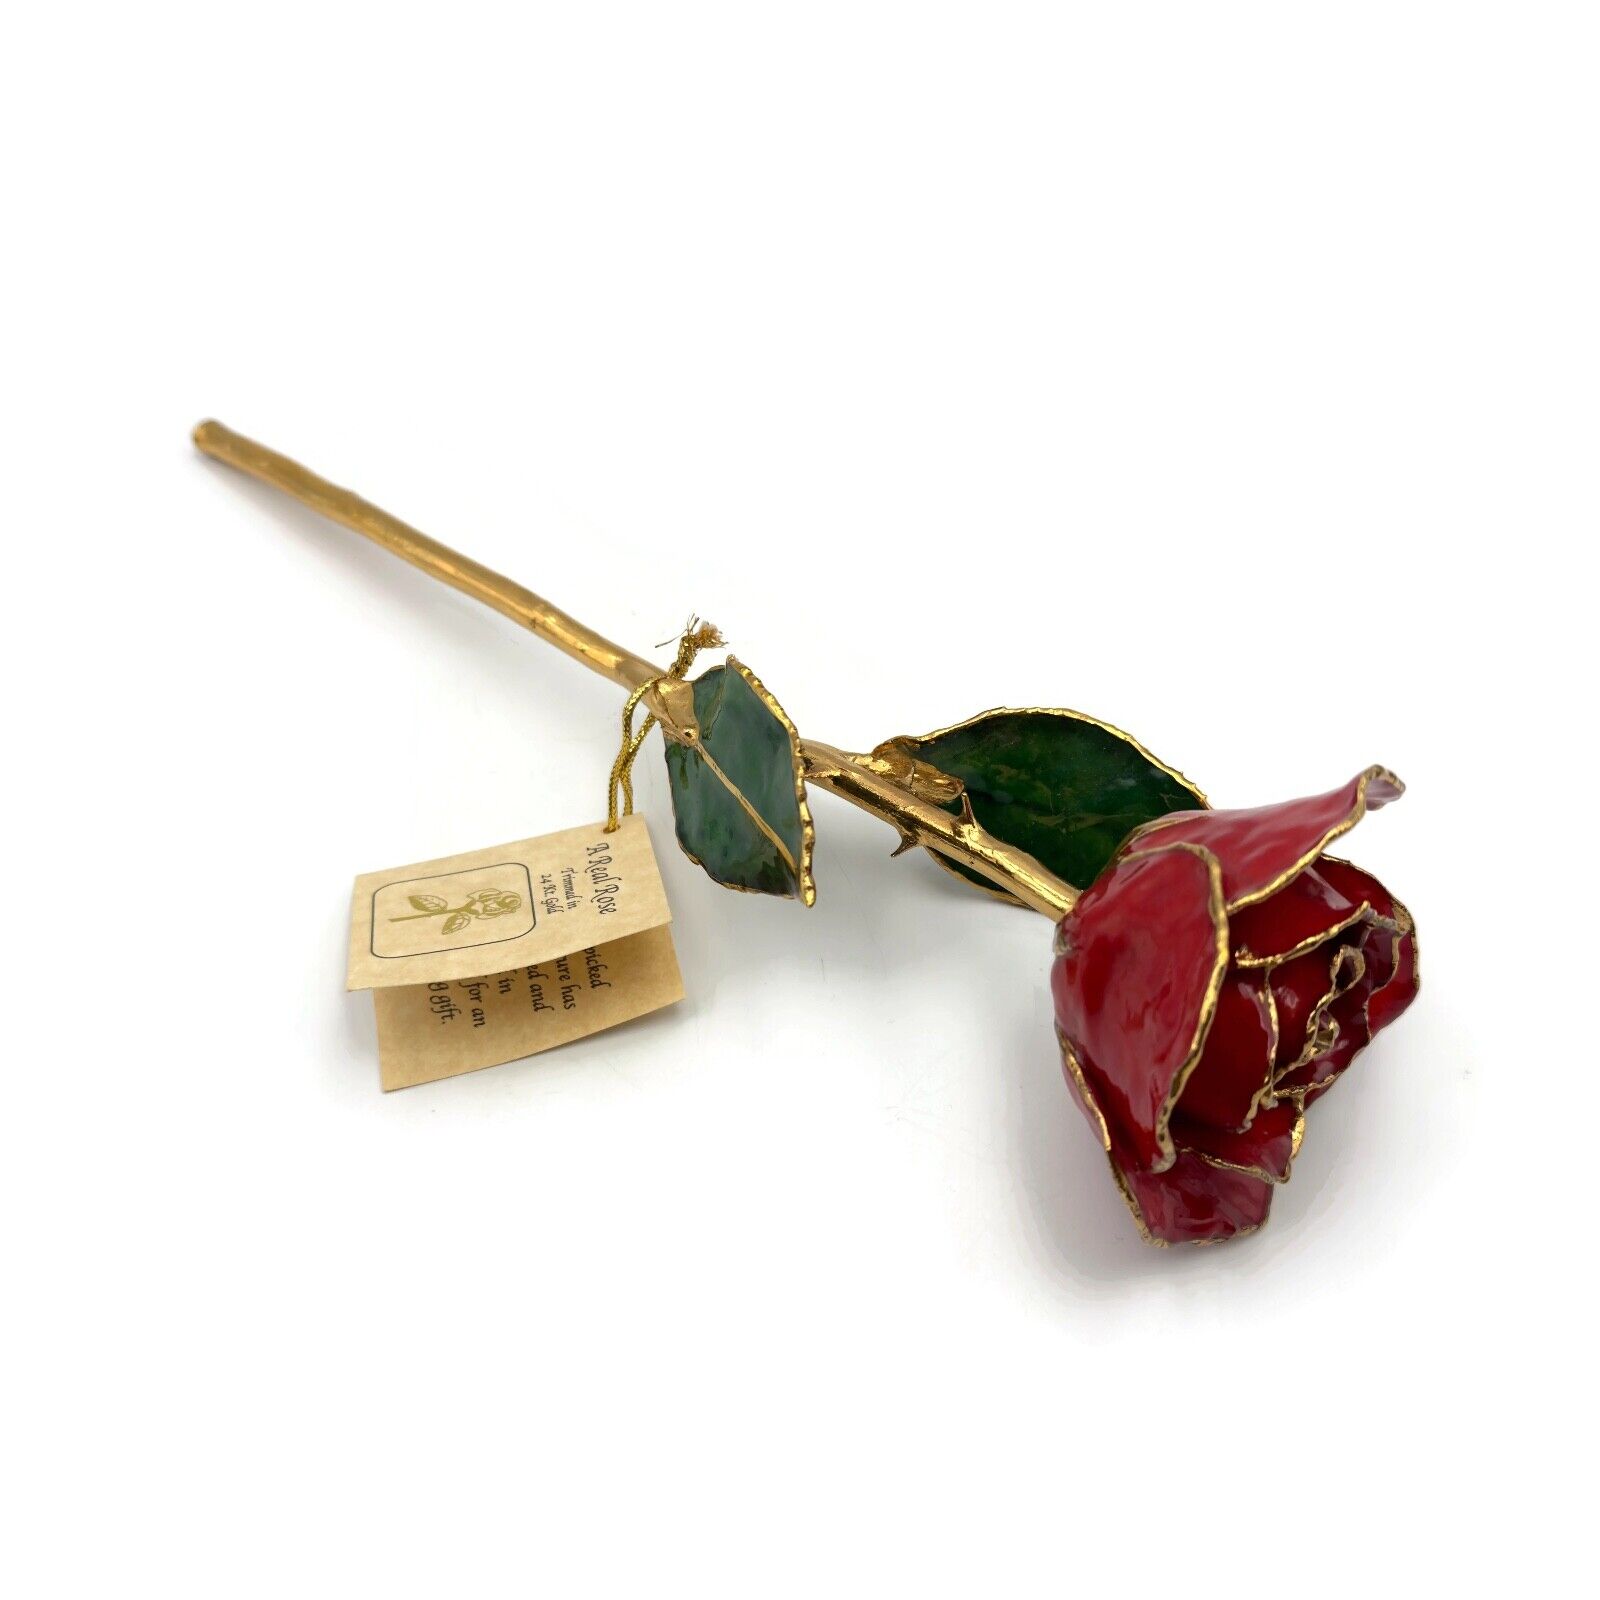 Real Rose Preserved And Trimmed In 24K Gold For Everlasting Beauty